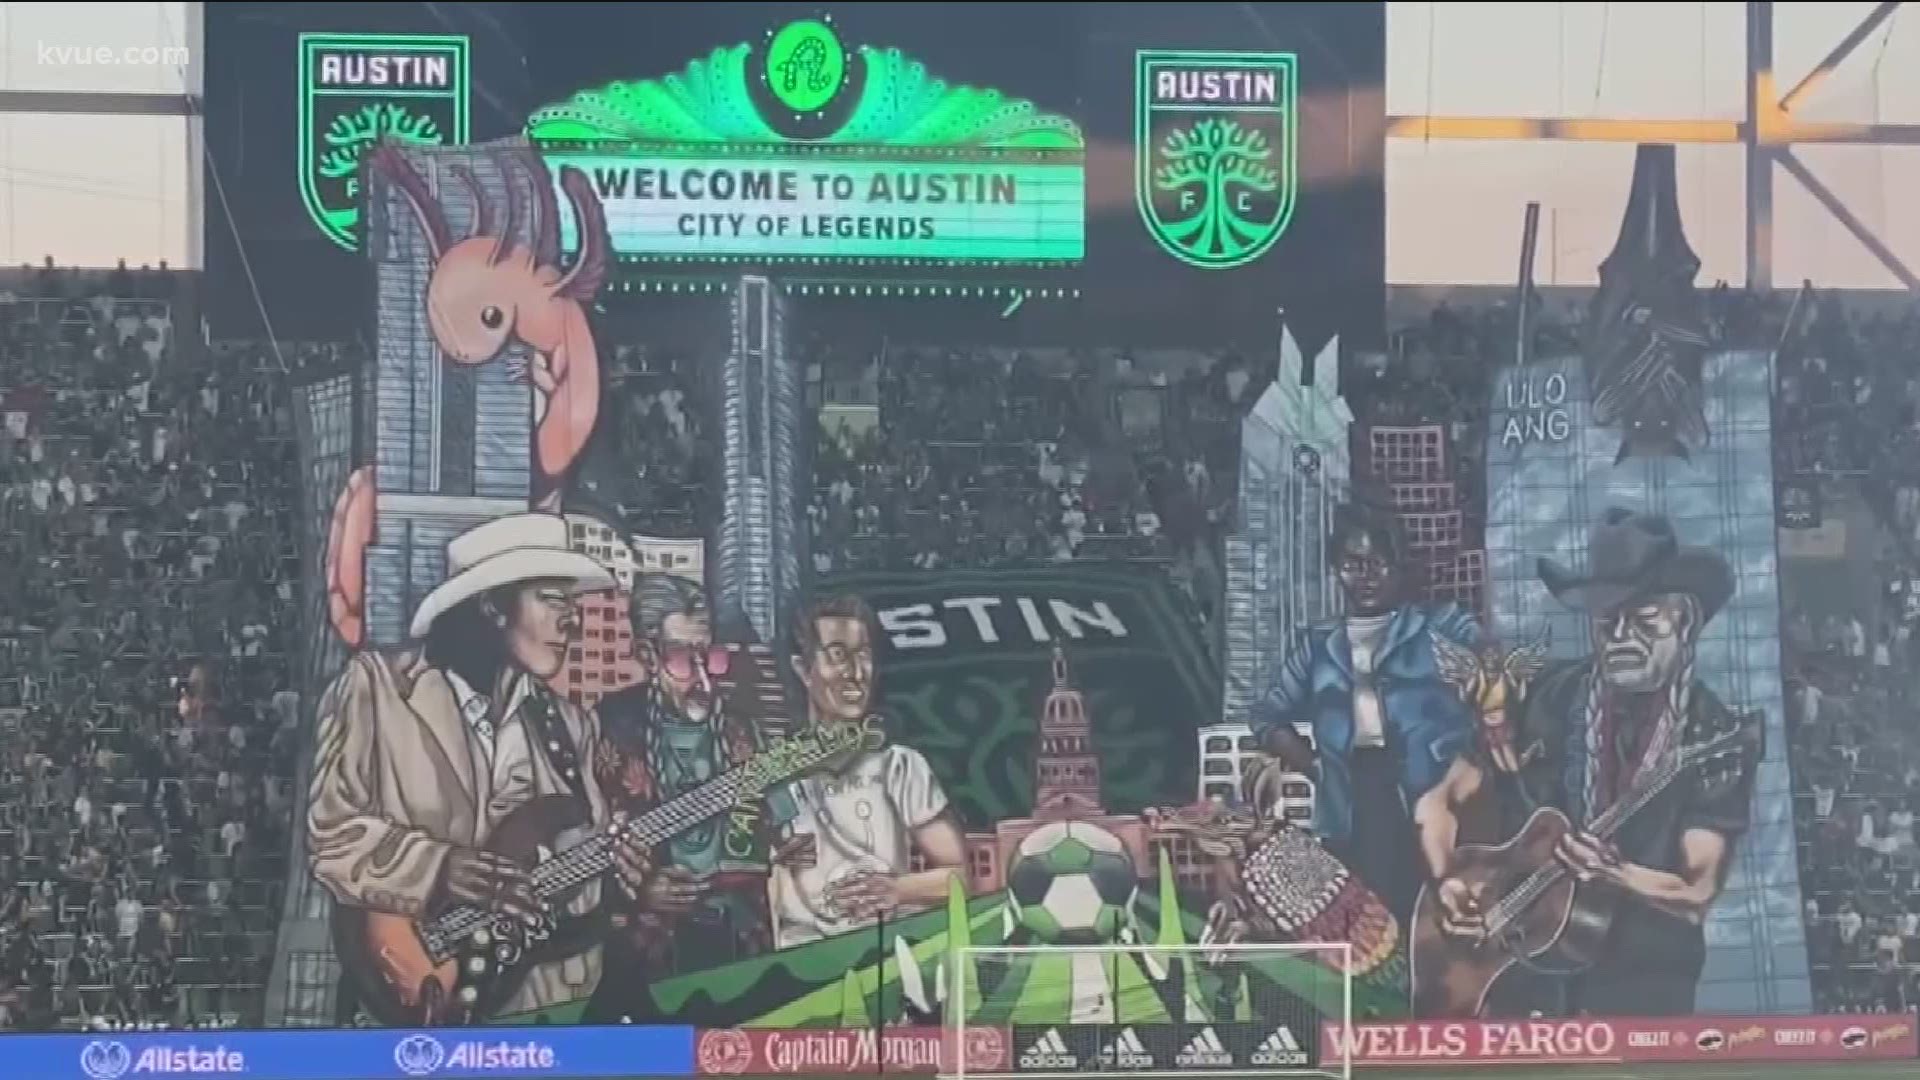 KVUE takes you behind the scenes with the artists creating Austin FC's first tifo. The tifo was revealed at the team's first Q2 Stadium home game.